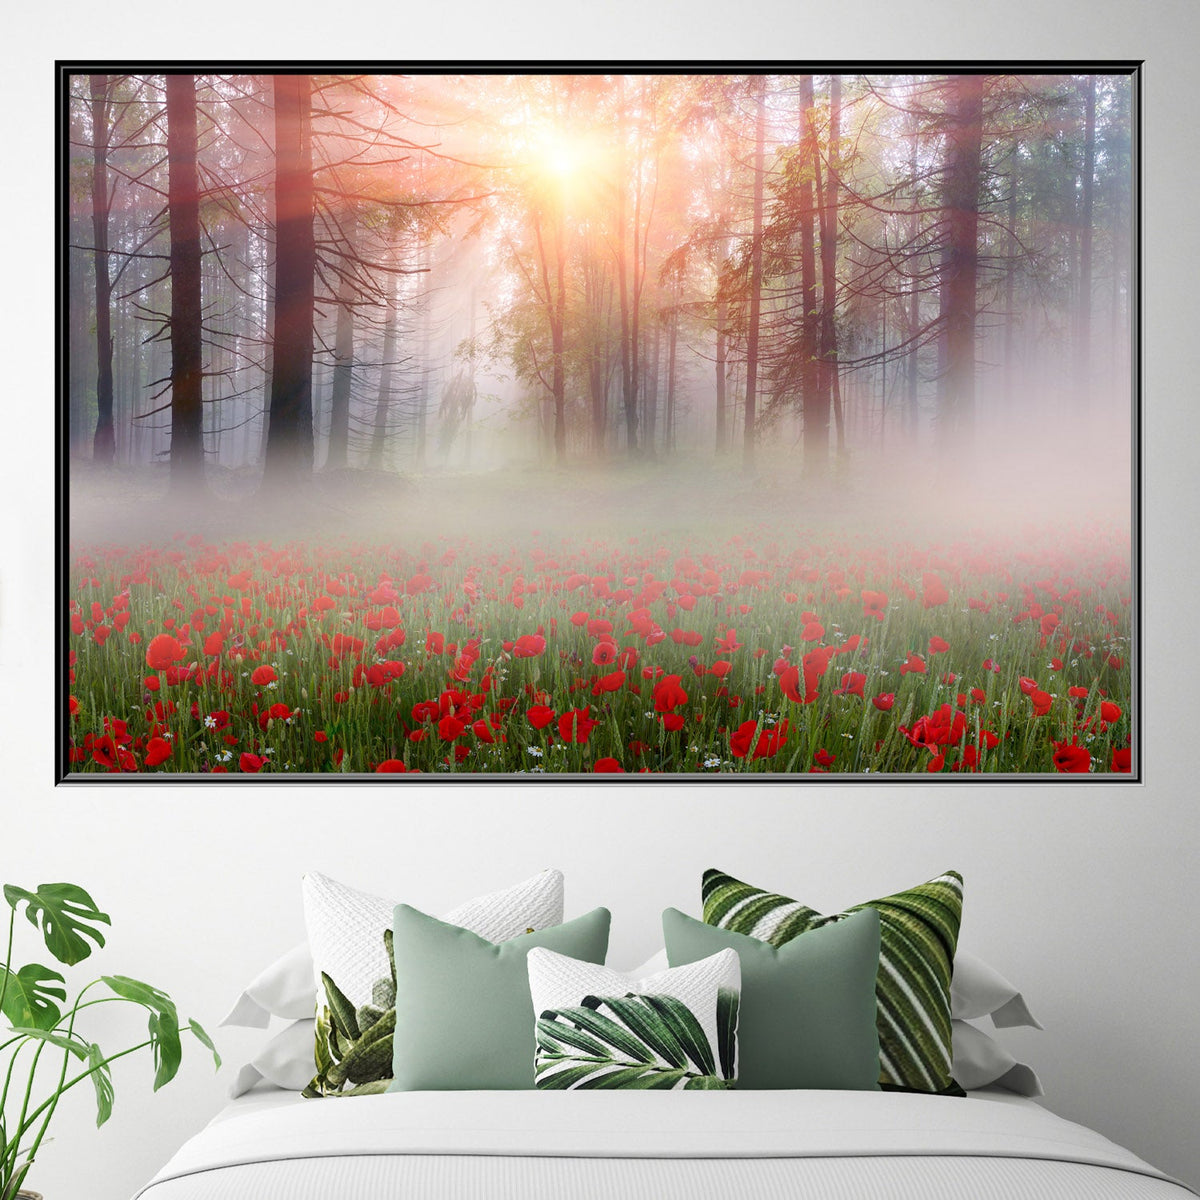 https://cdn.shopify.com/s/files/1/0387/9986/8044/products/PoppiesintheForestCanvasArtprintStretched-FloatingFrame-1.jpg